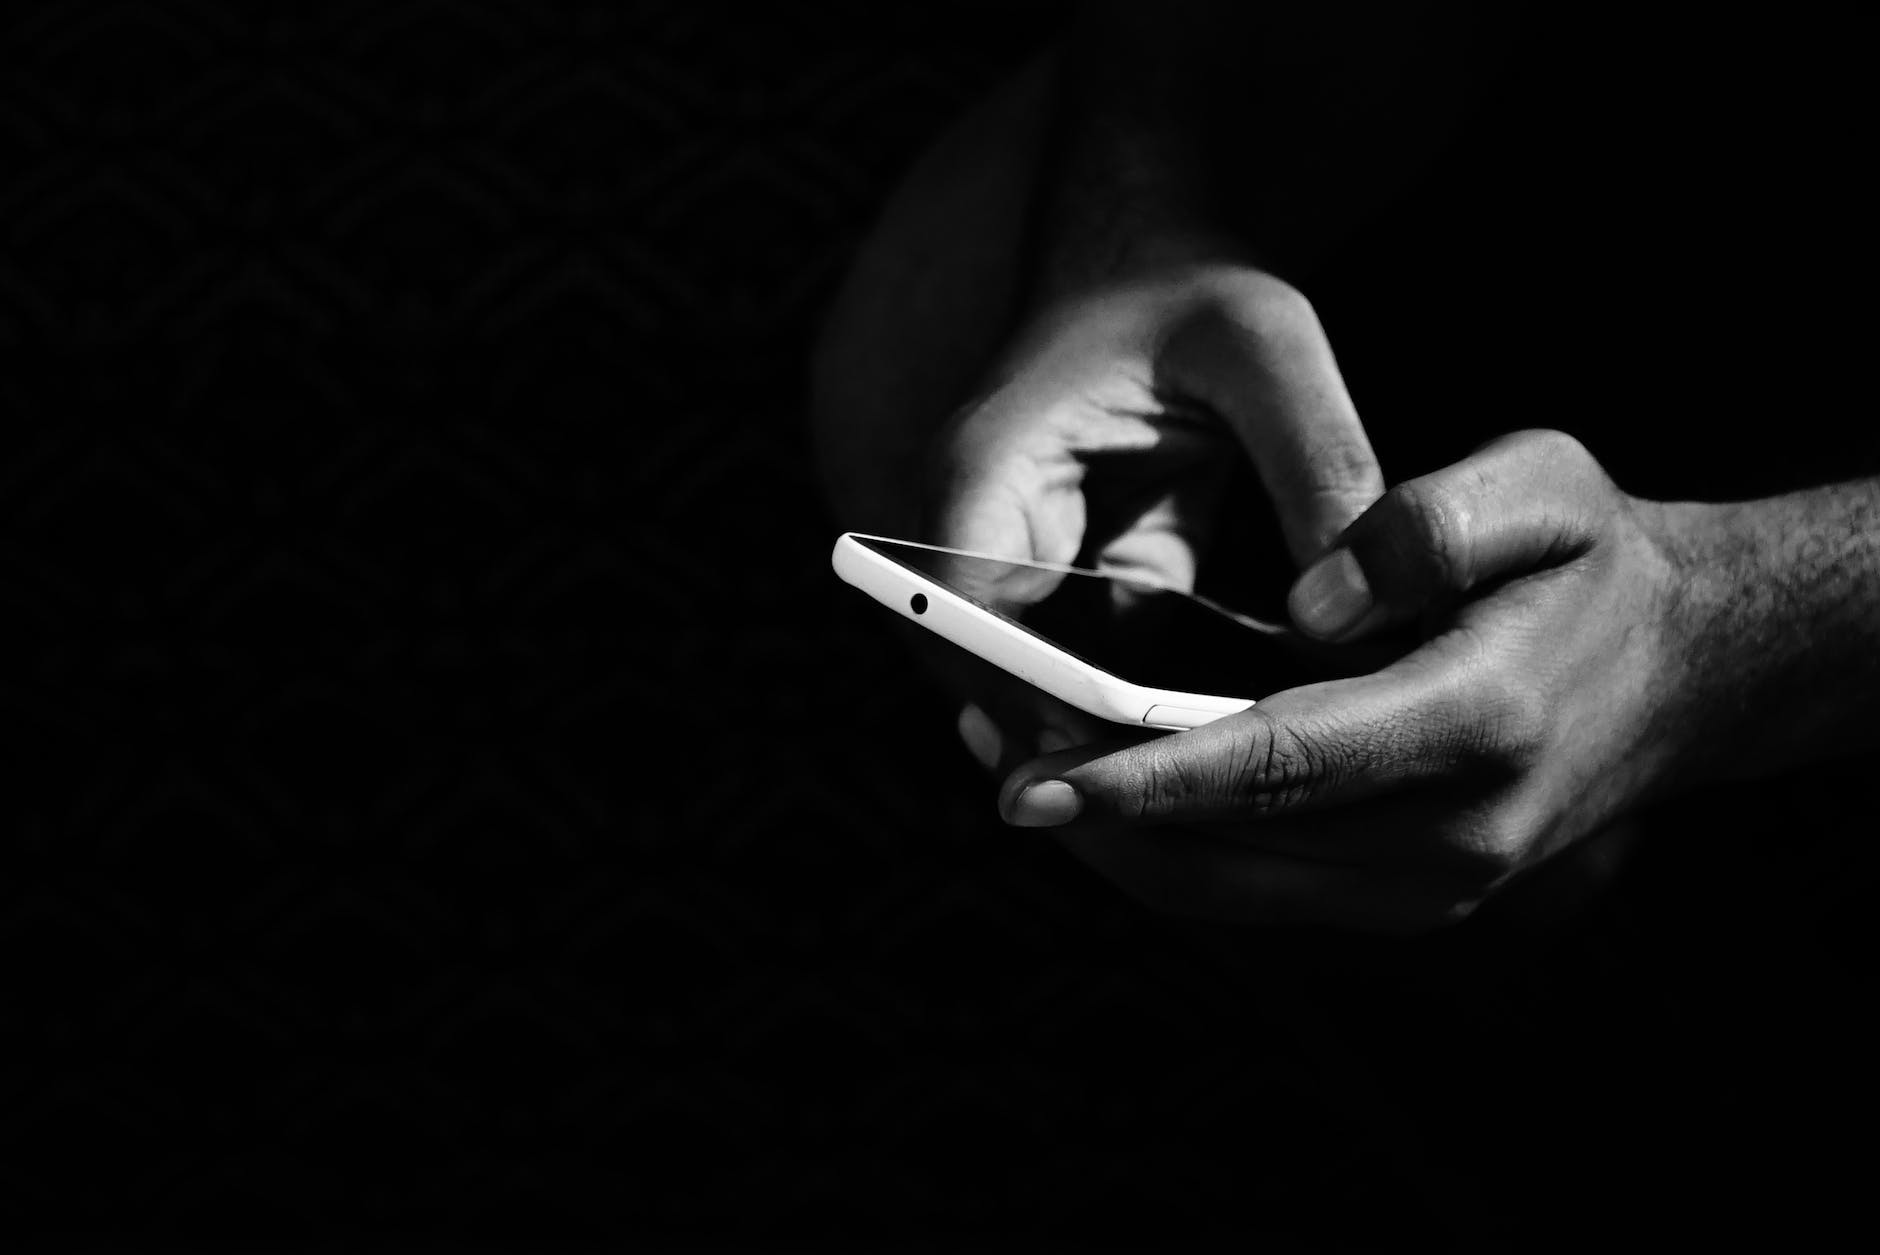 online business grey scale photo of person holding smartphone